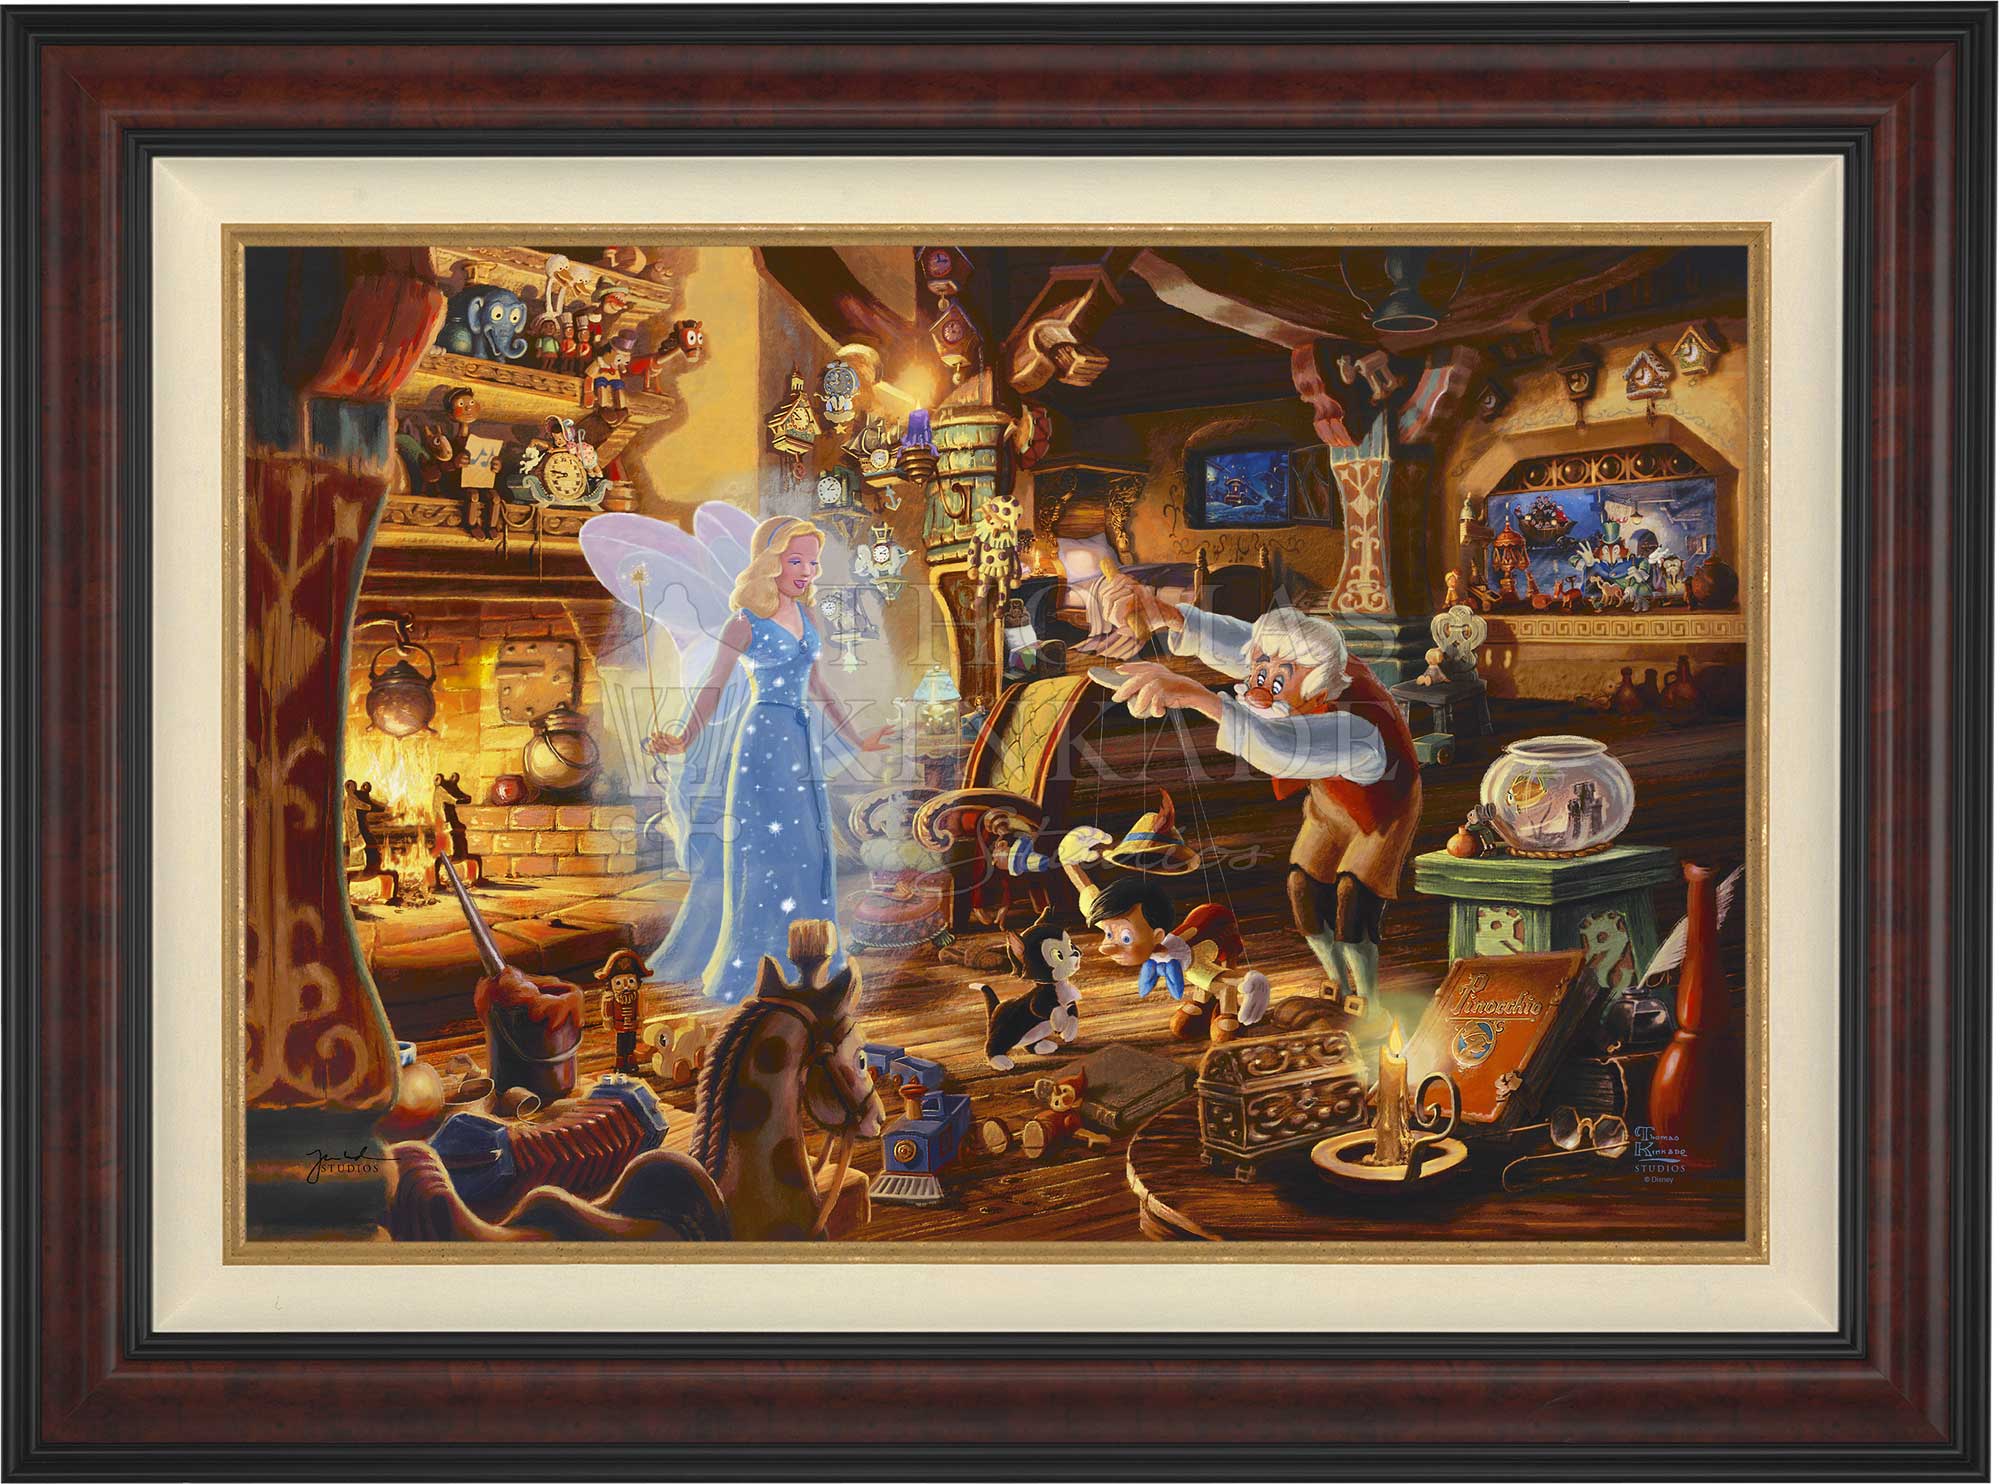 The Blue Fairy is poised to make this wish come true. Joy fills the workshop as Geppetto’s wish is granted.  The faces of Jiminy Cricket and Cleo as they watch the sweet interaction of Figaro meeting Pinocchio for the very first time. Burl Frame